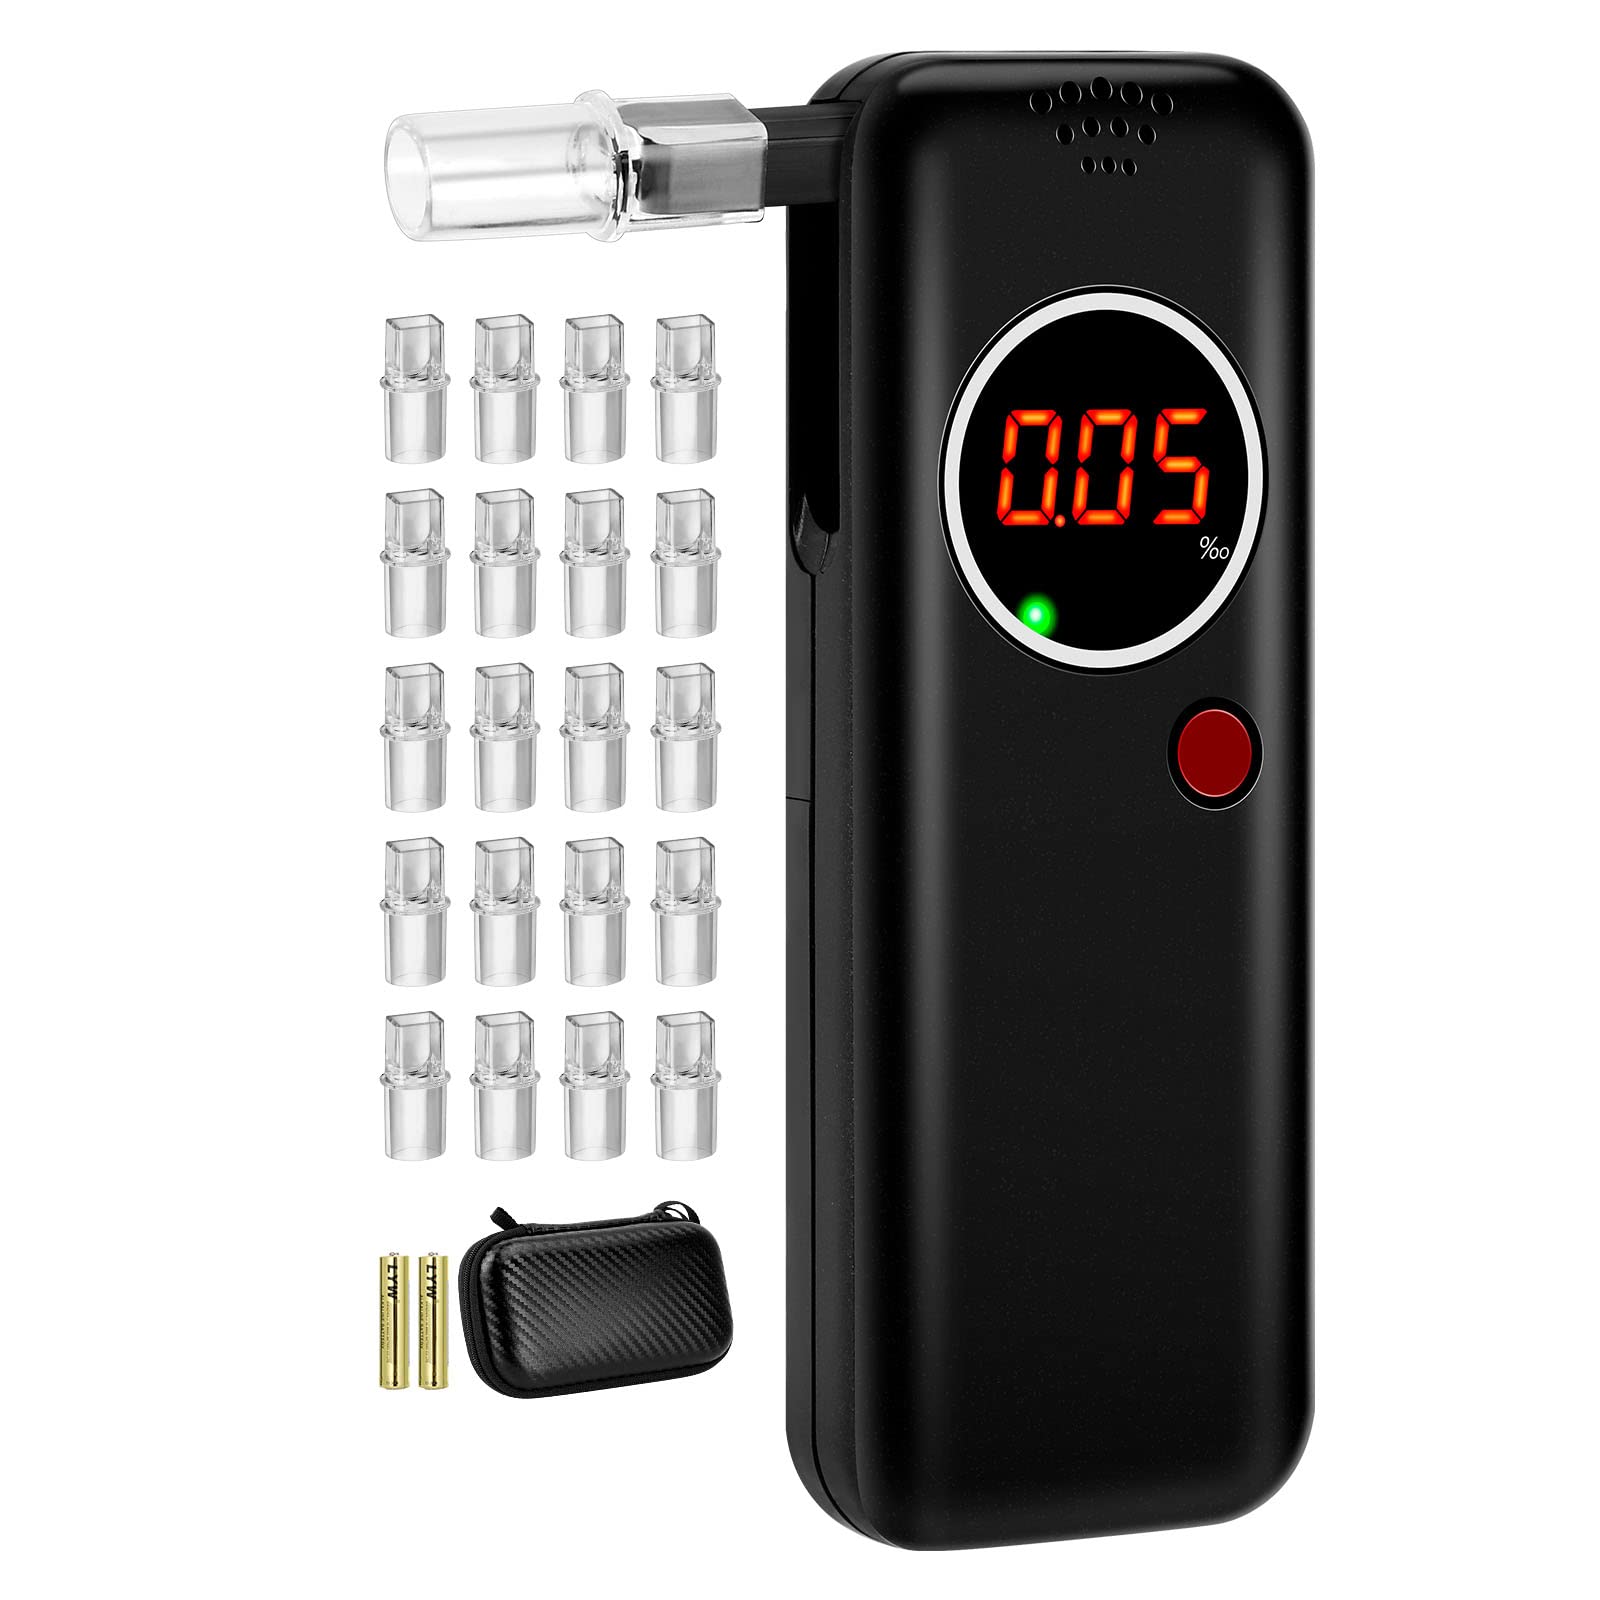 Alcohol Breathalyzer, Professional Grade Accuracy Alcohol Breath Tester  with Digital LCD Display, Portable Blood Alcohol Tester with 20 Mouthpieces  for Personal Home Party Use (Black)